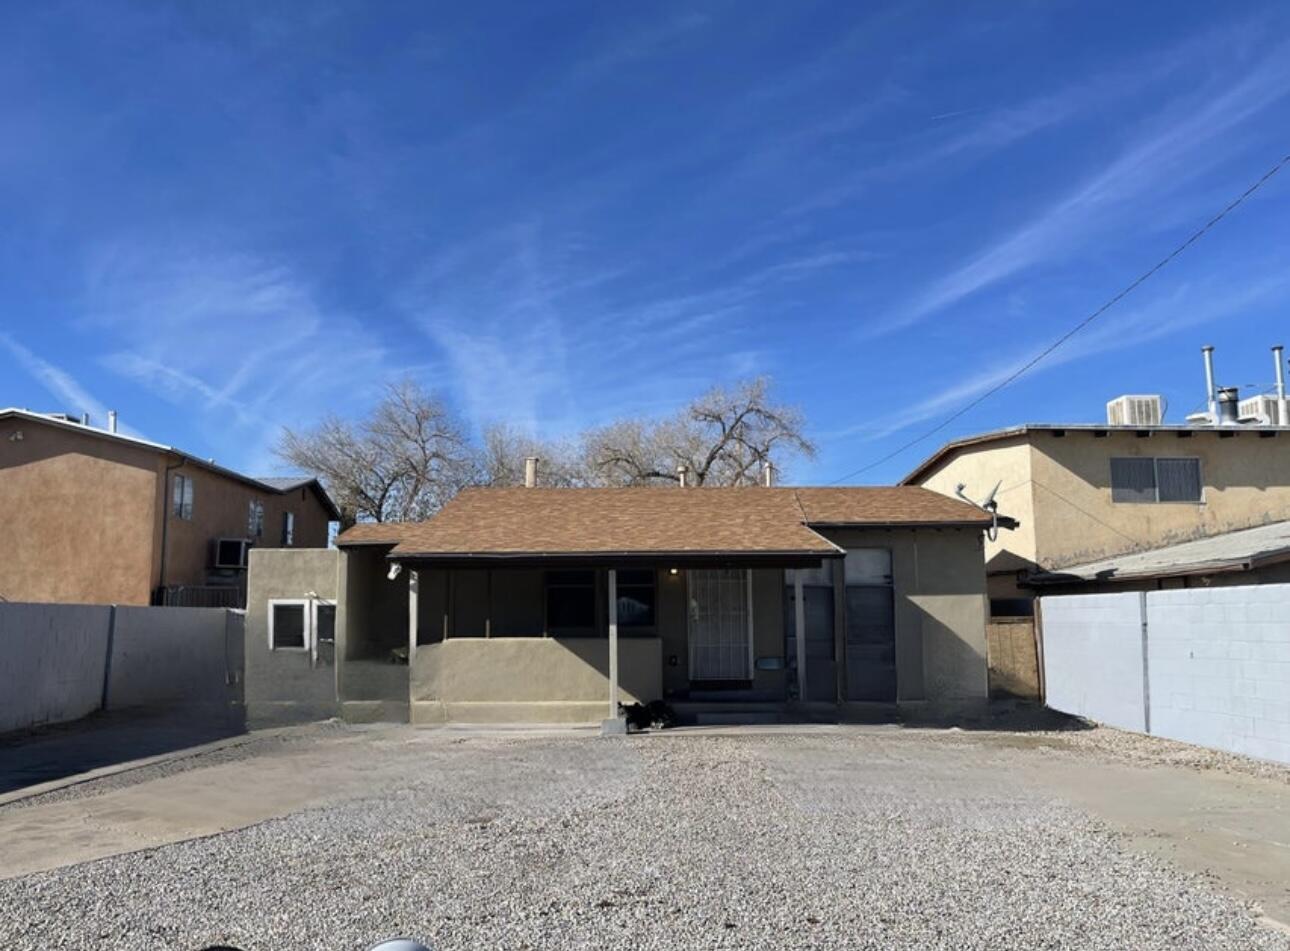 DUPLEX FOR SALE! Third basement unit additionally rented out with all amenities. Property features central location, newer stucco, and a NEW ROOF. Basement unit is on a year lease and the two upper units are month to month. Great investment opportunity!